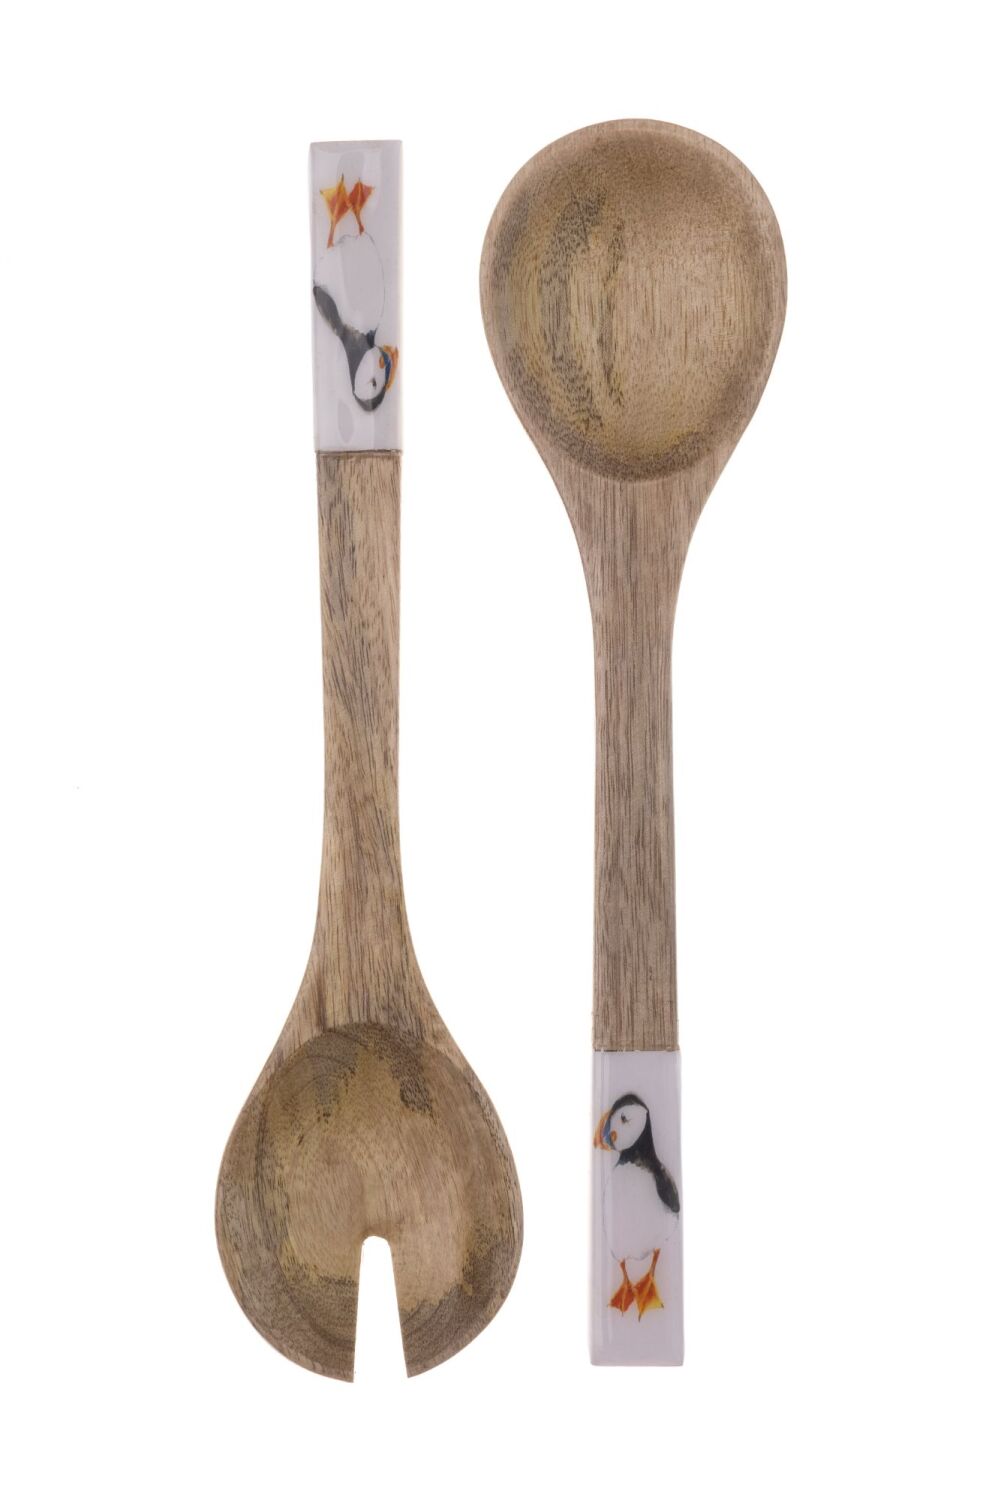 Puffin Wooden Salad Servers